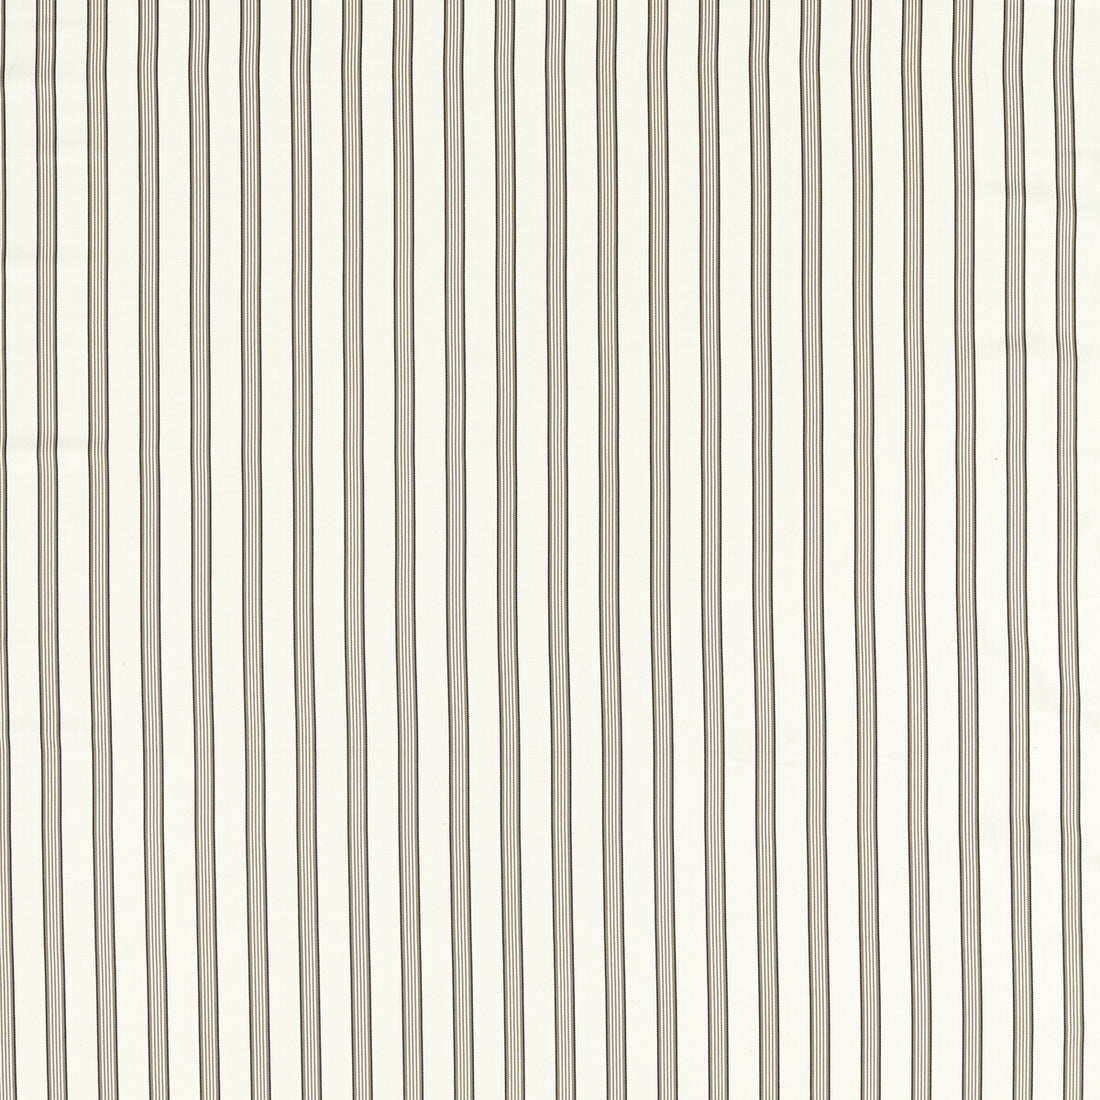 Edison fabric in charcoal/natural color - pattern F1499/01.CAC.0 - by Clarke And Clarke in the Clarke &amp; Clarke Edgeworth collection